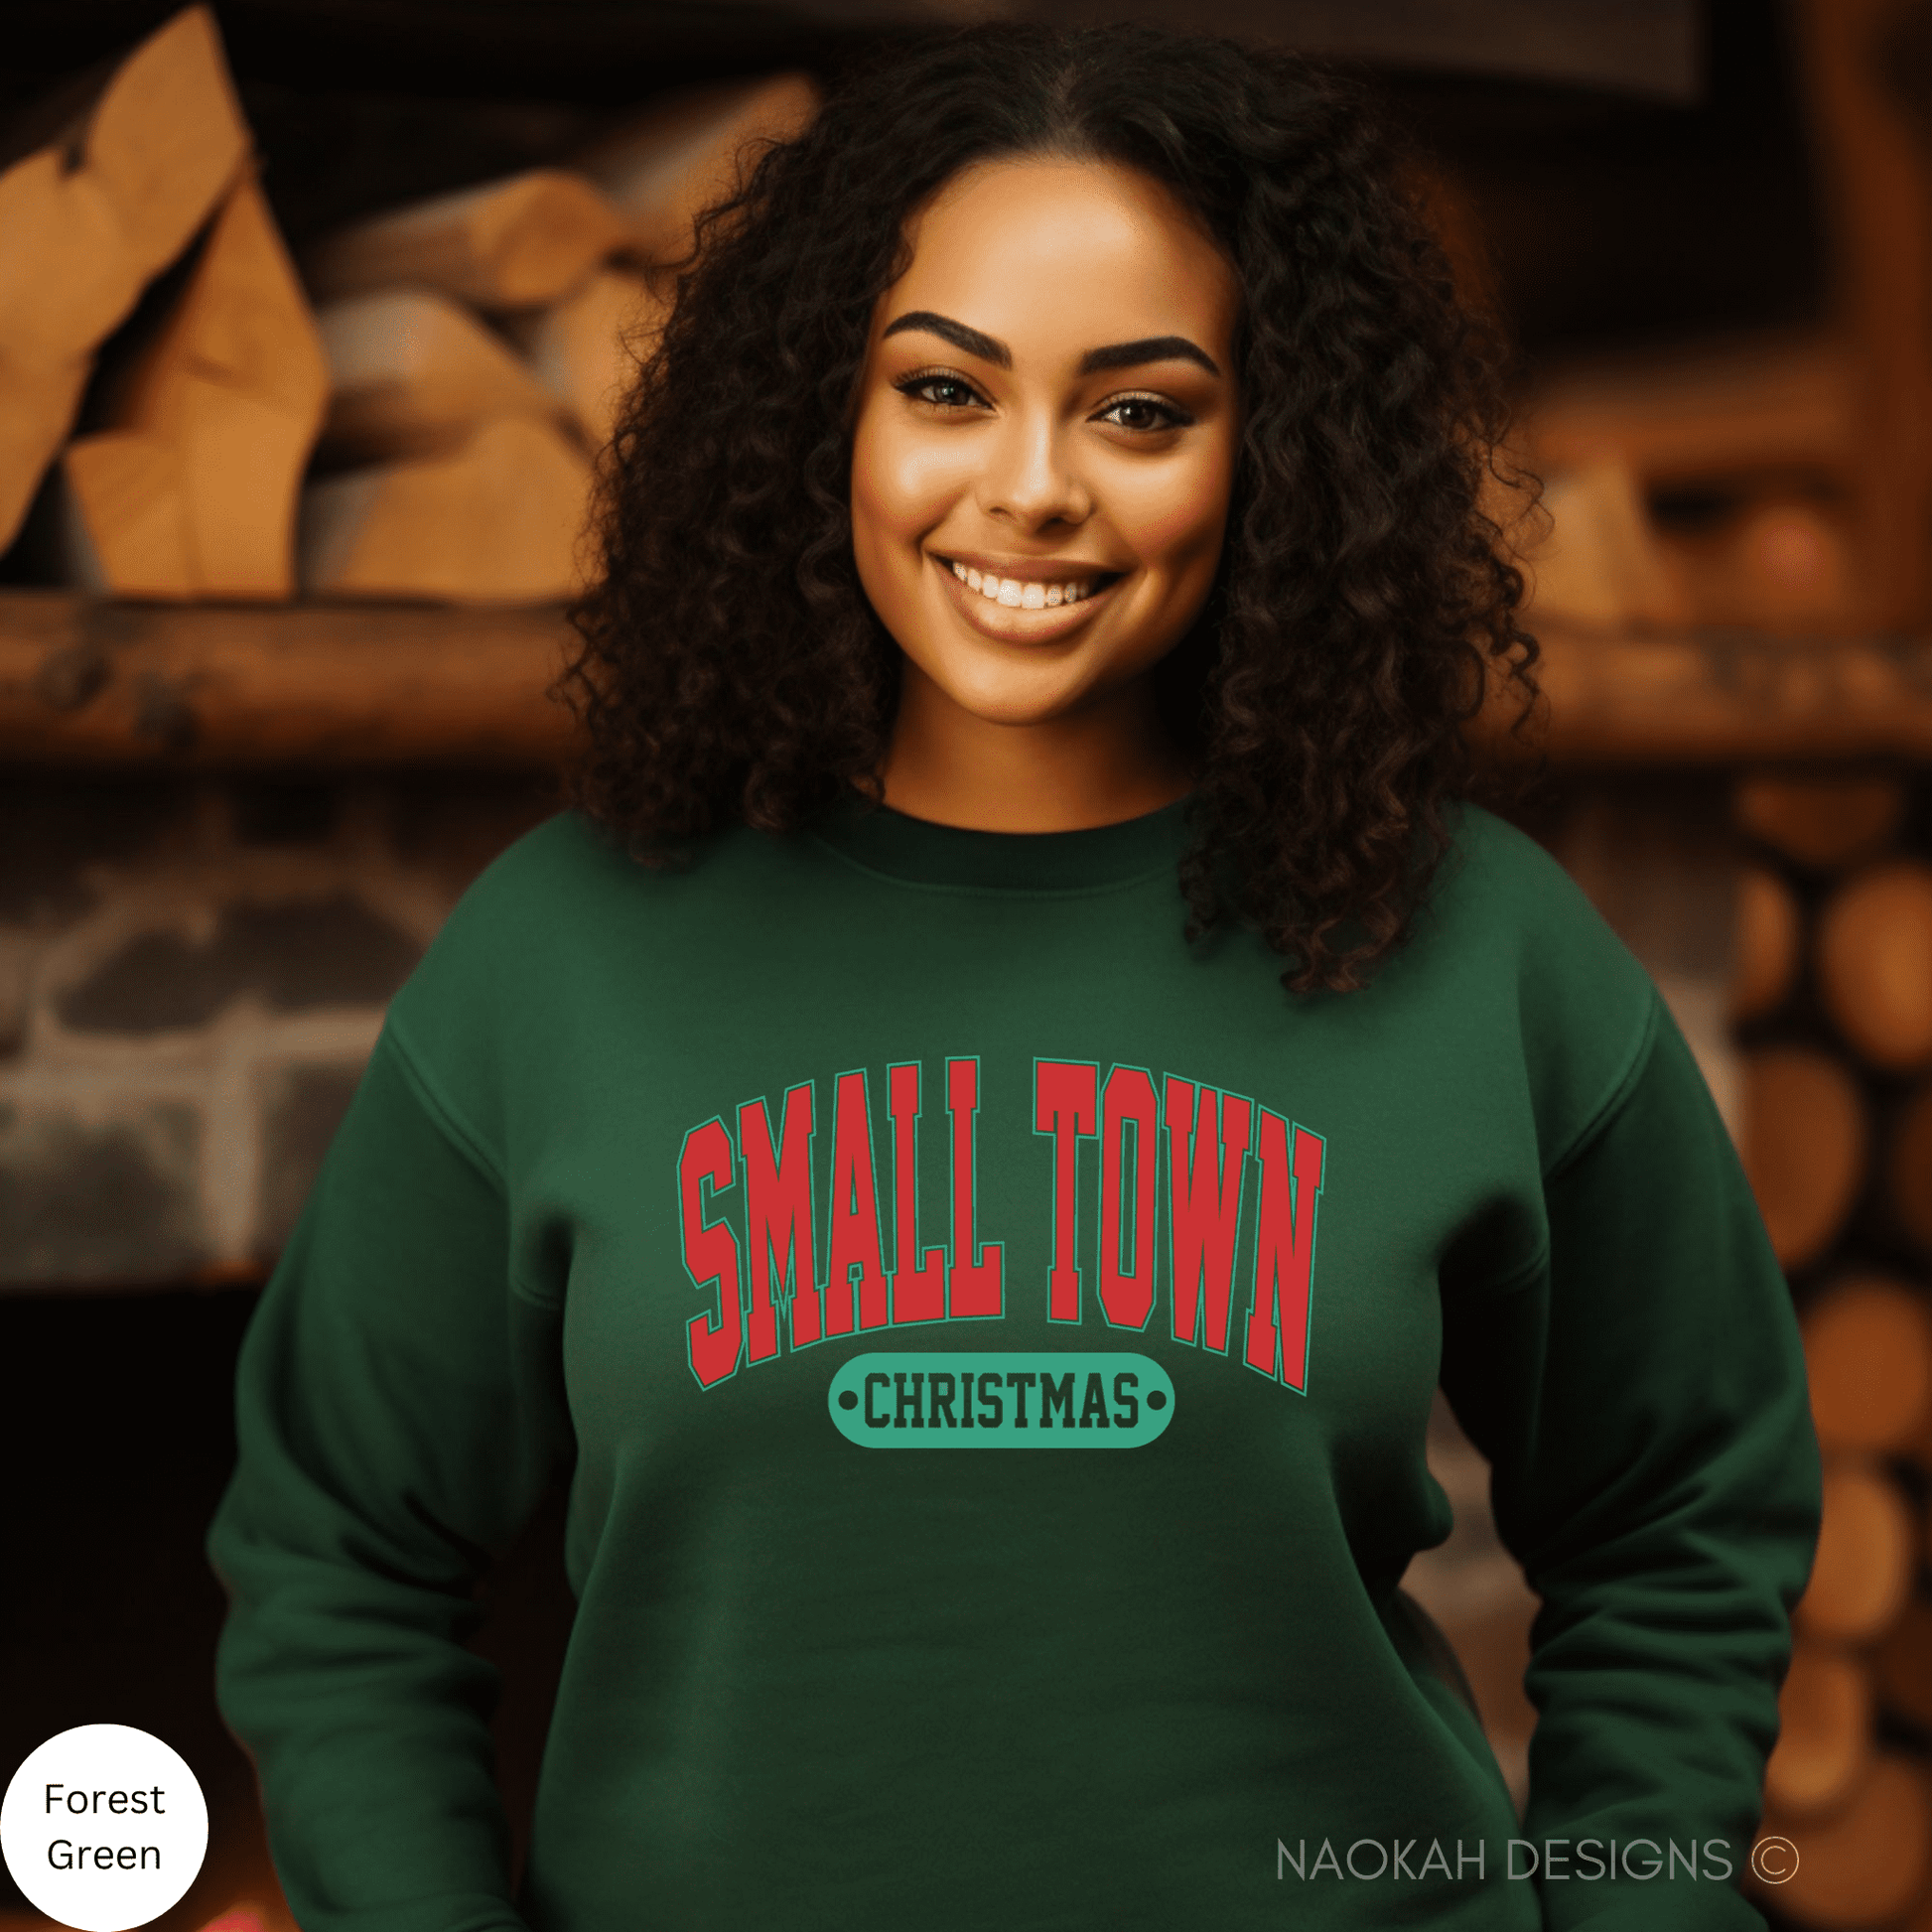 Small Town Christmas Sweater, Country Christmas Shirt, Hometown Shirt, Small Town Christmas Varsity Letters Sweater, Trendy Christmas